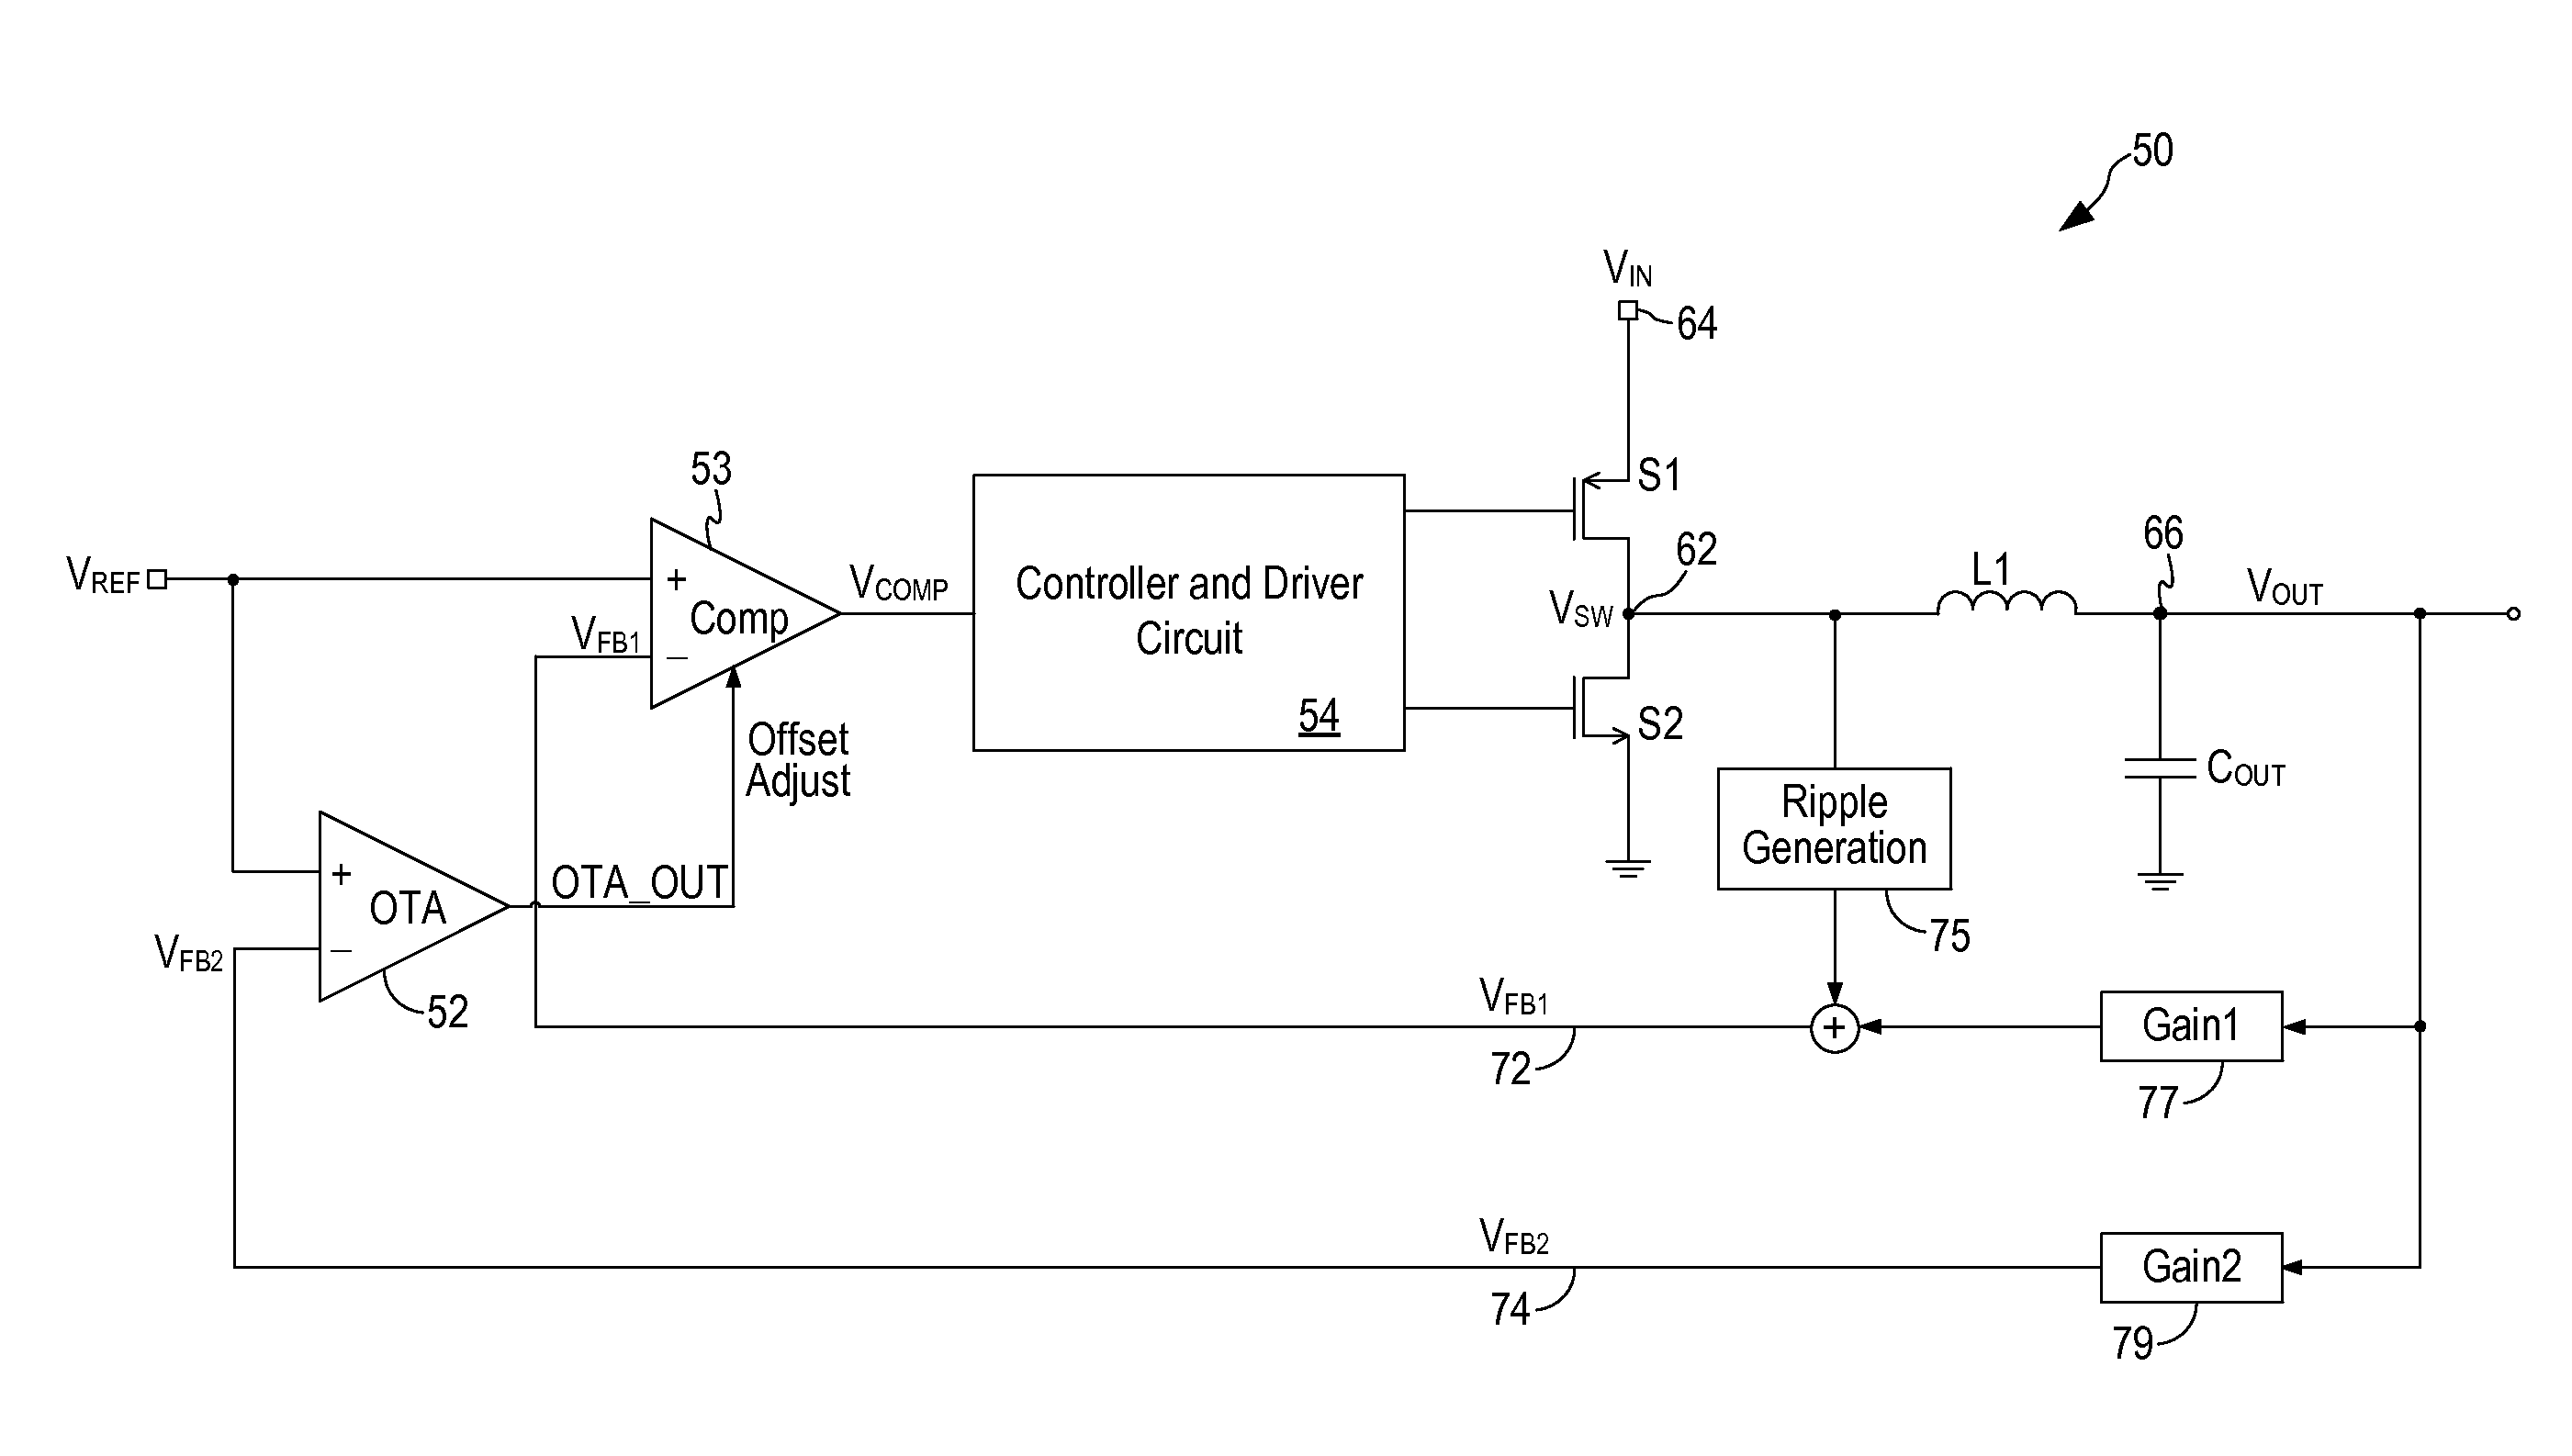 Buck dc-dc converter with accuracy enhancement